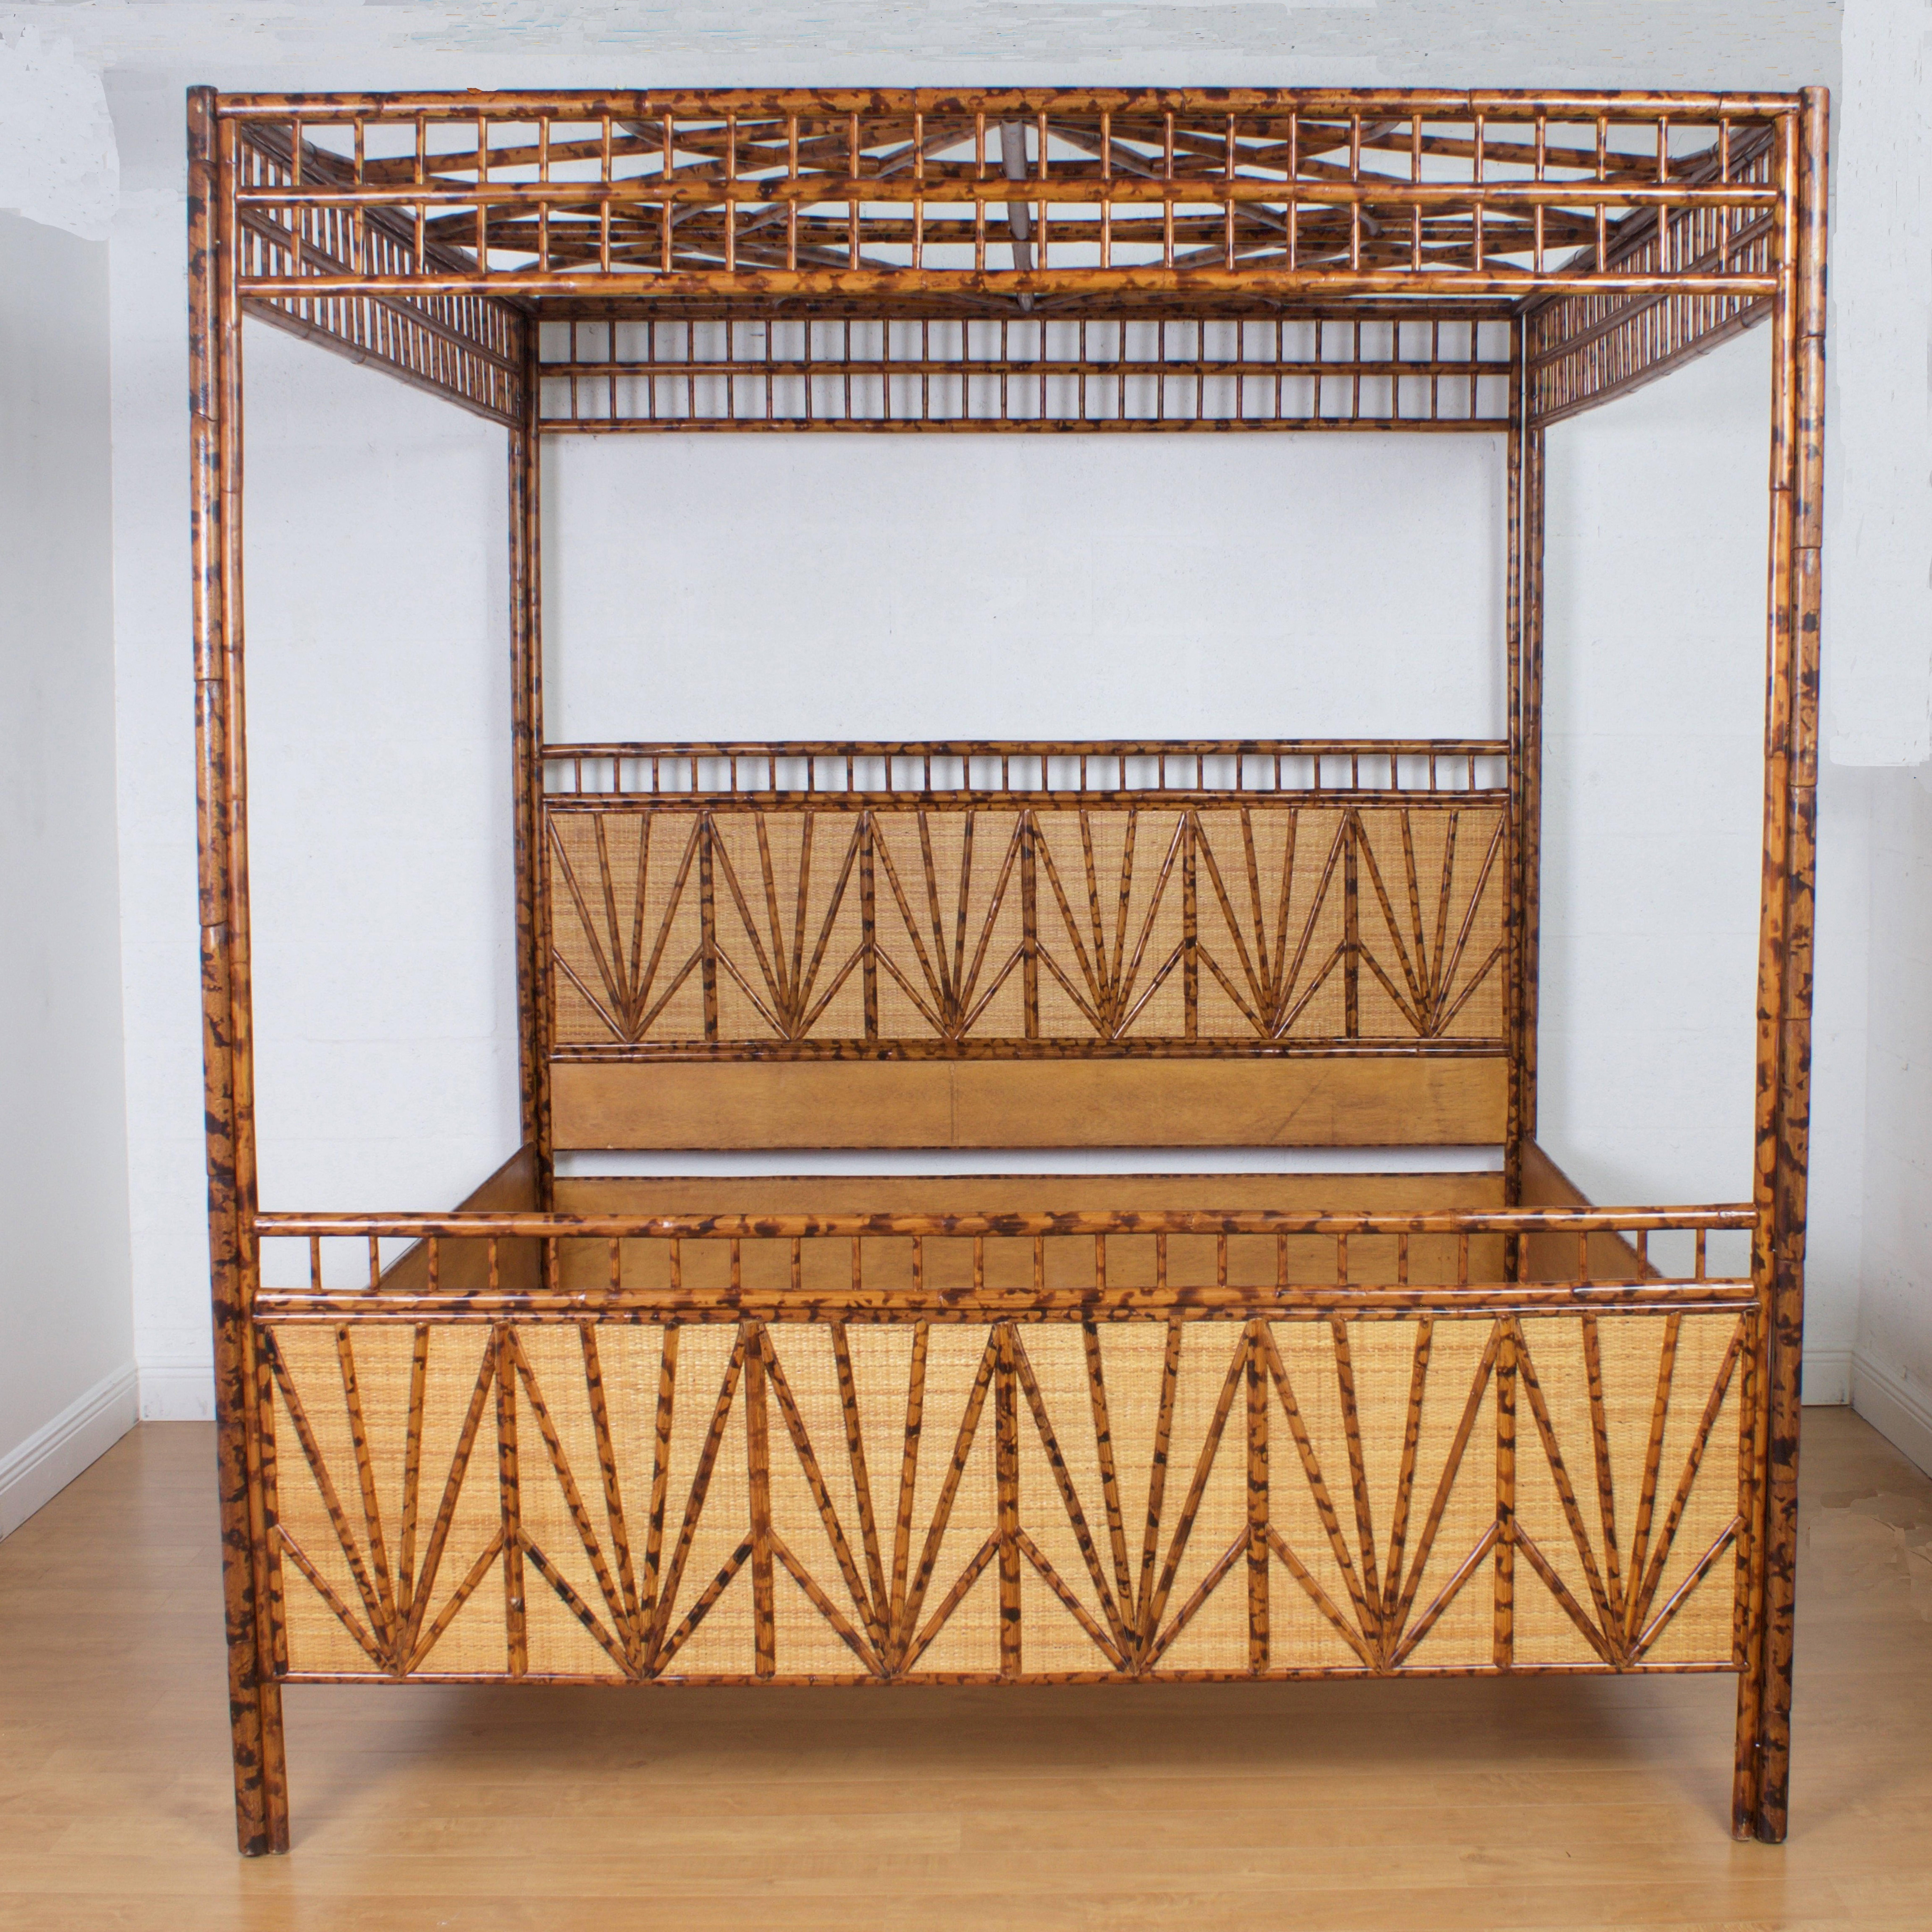 Dramatic King-size, Mid-Century Maitland-Smith burnt bamboo and grasscloth canopy bed with plenty of decorative style and a bit of romance to boot. Perfect for island, coastal, or any style of living that deserves an exotic flair. 

.